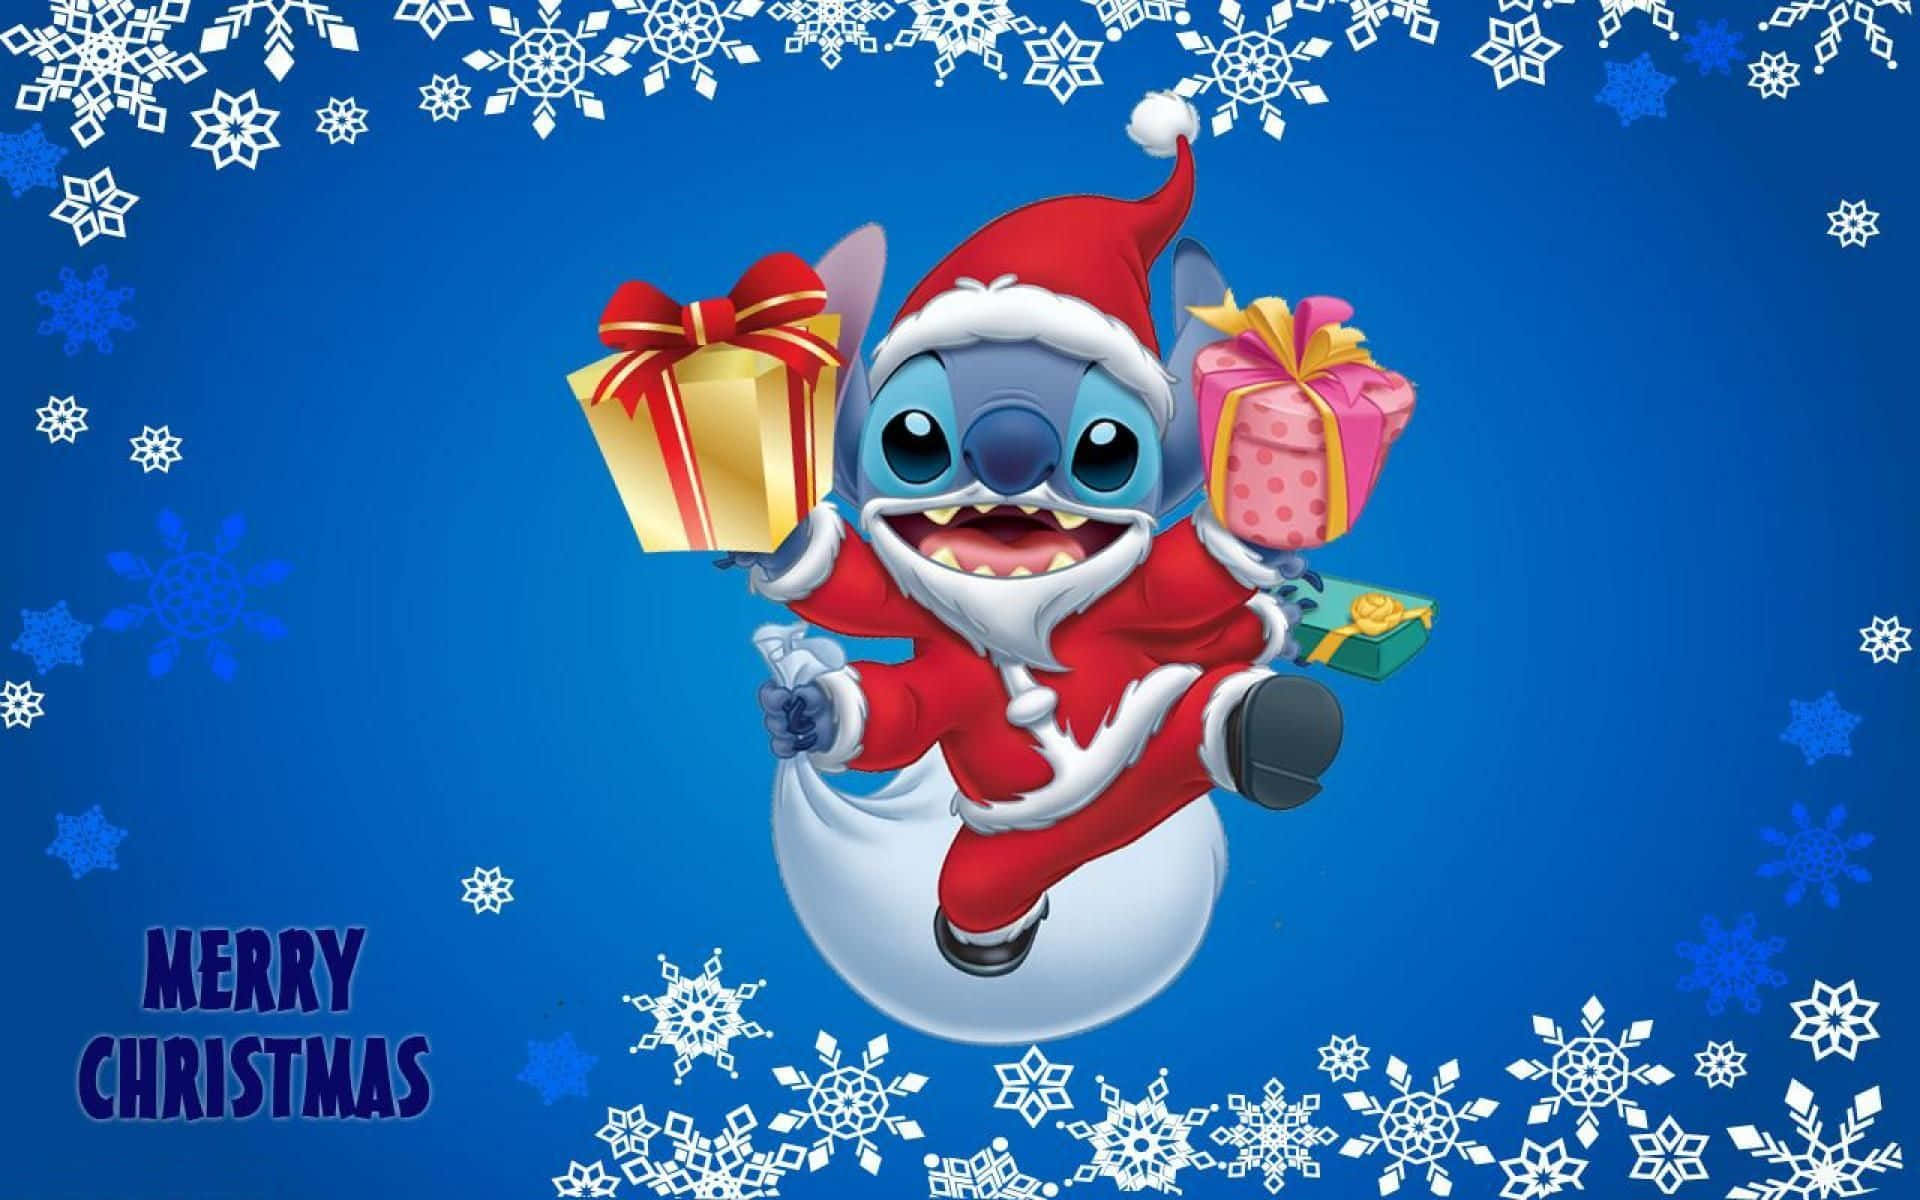 Have a Magical Christmas with Disney this season!